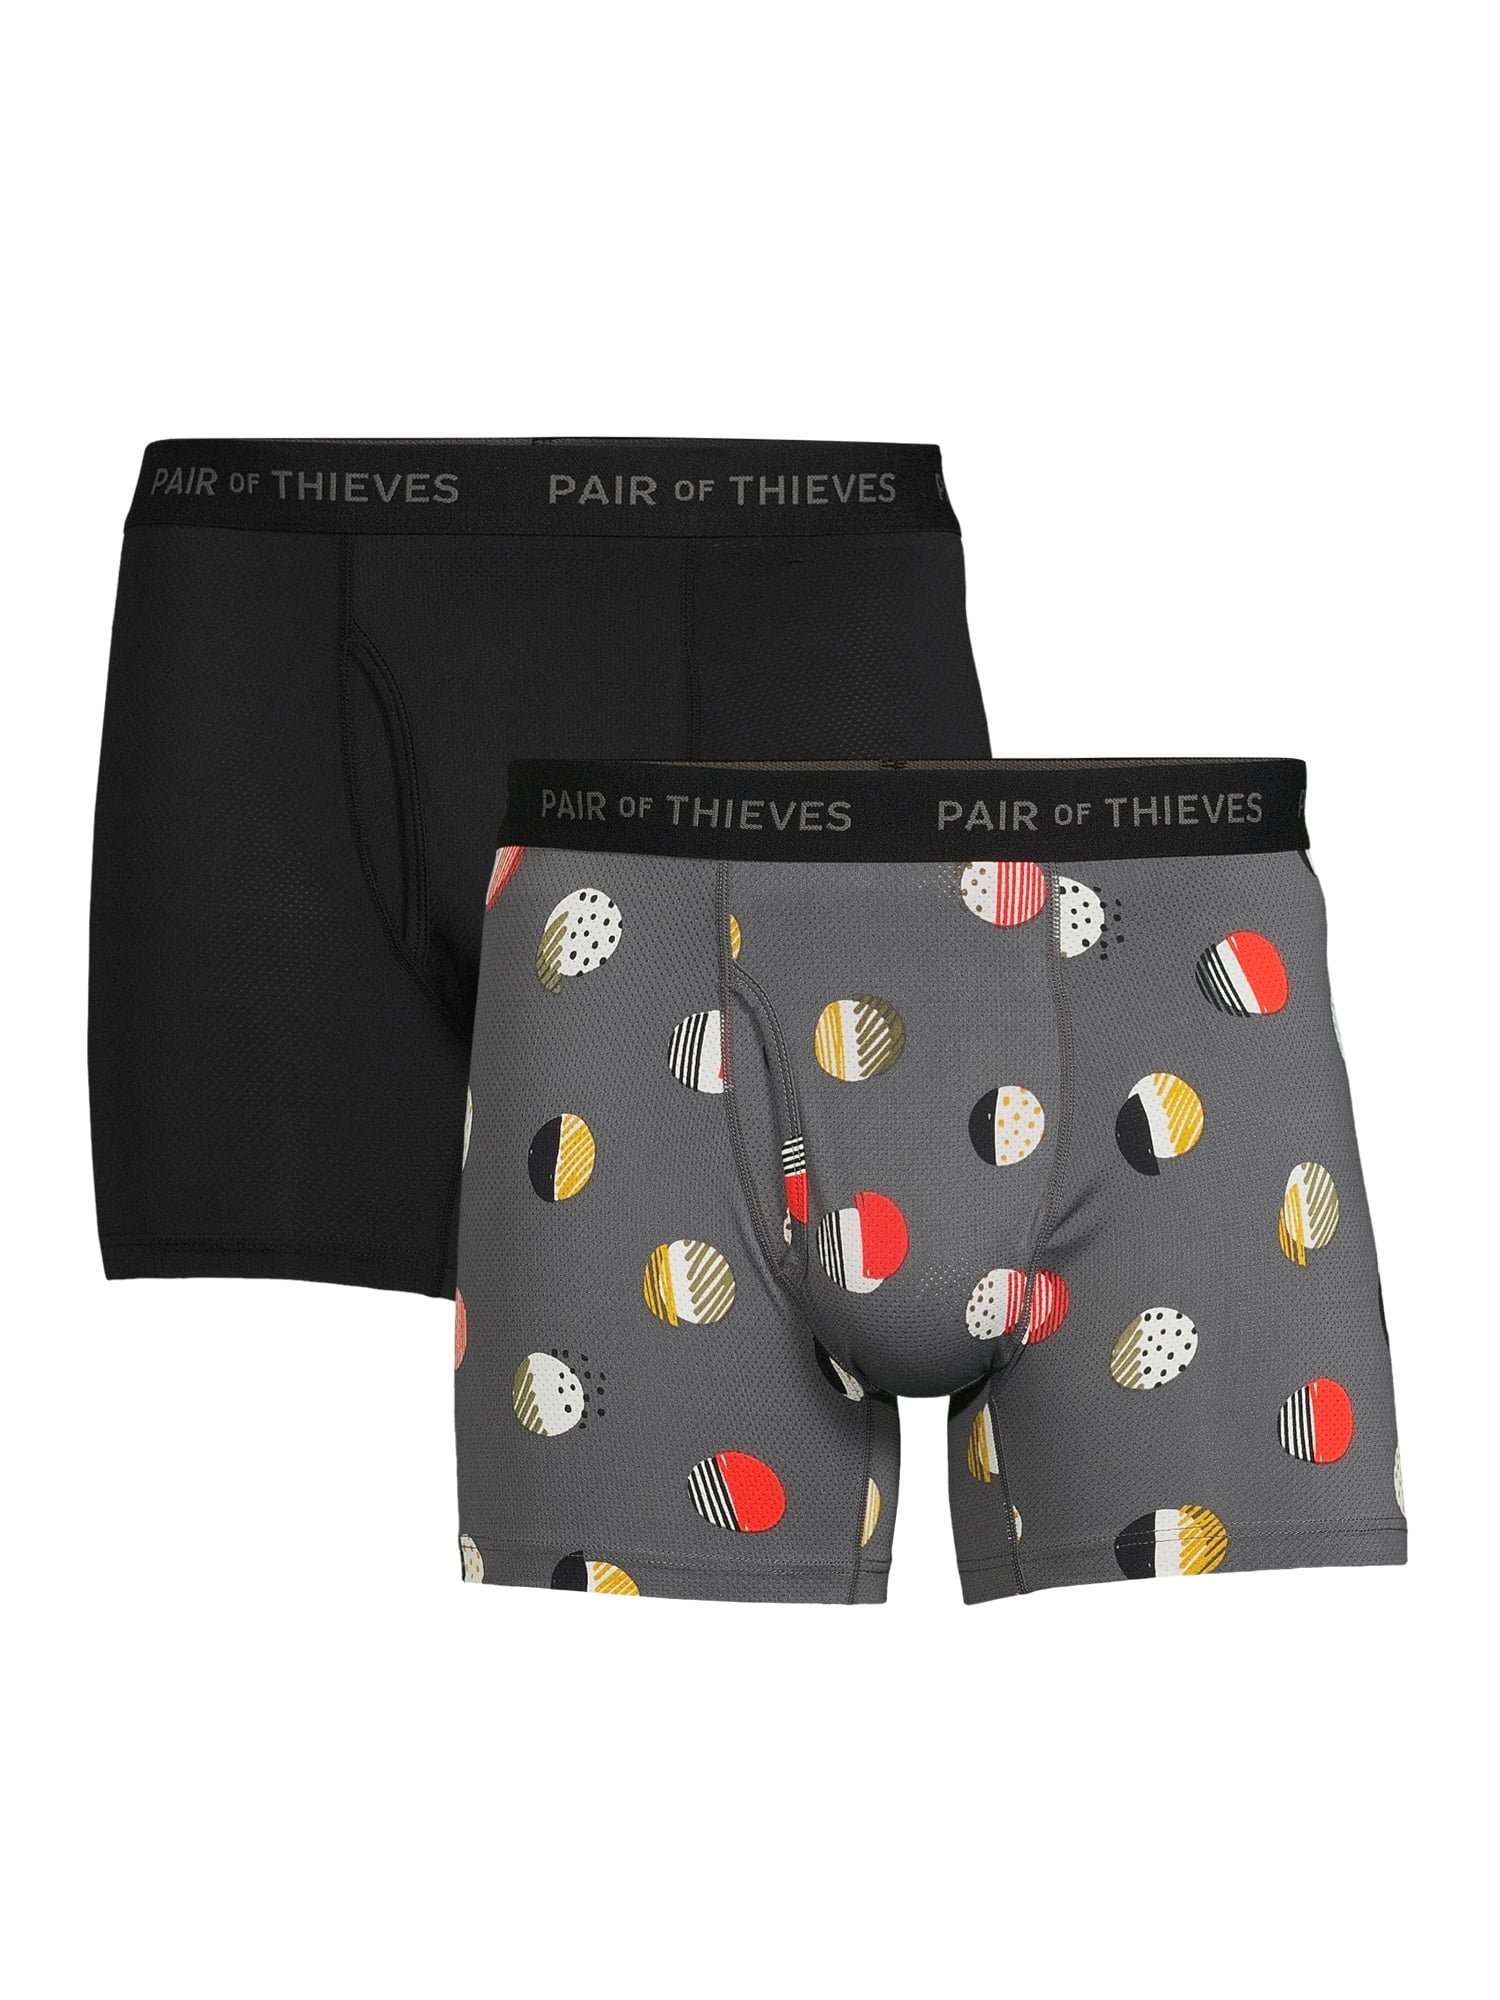 Pair of Thieves Super Fit Underwear for Men Pack - 2 & 3 Pack